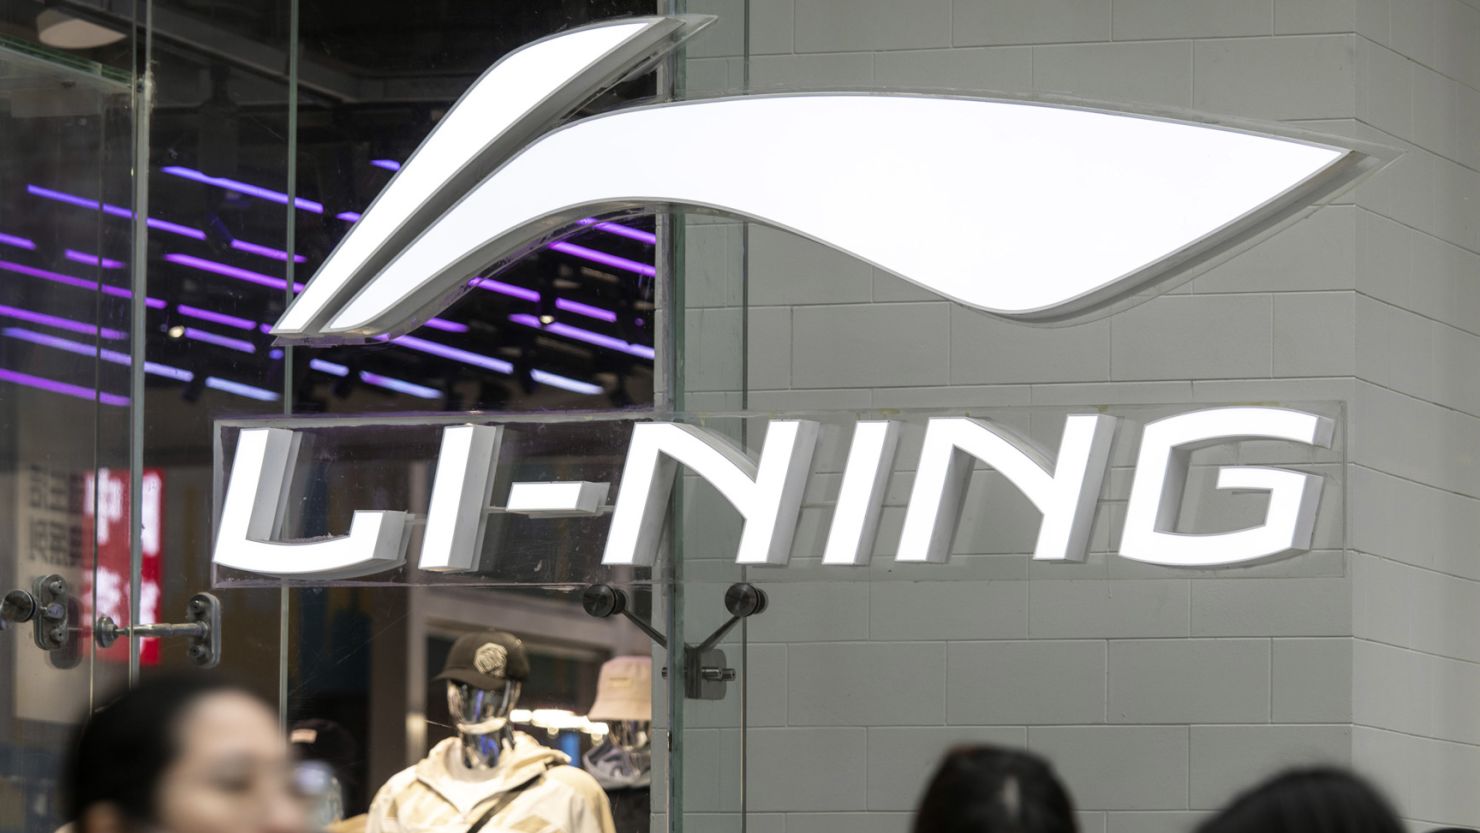 Li-Ning Is the Chinese Sportswear Brand You Need to Know